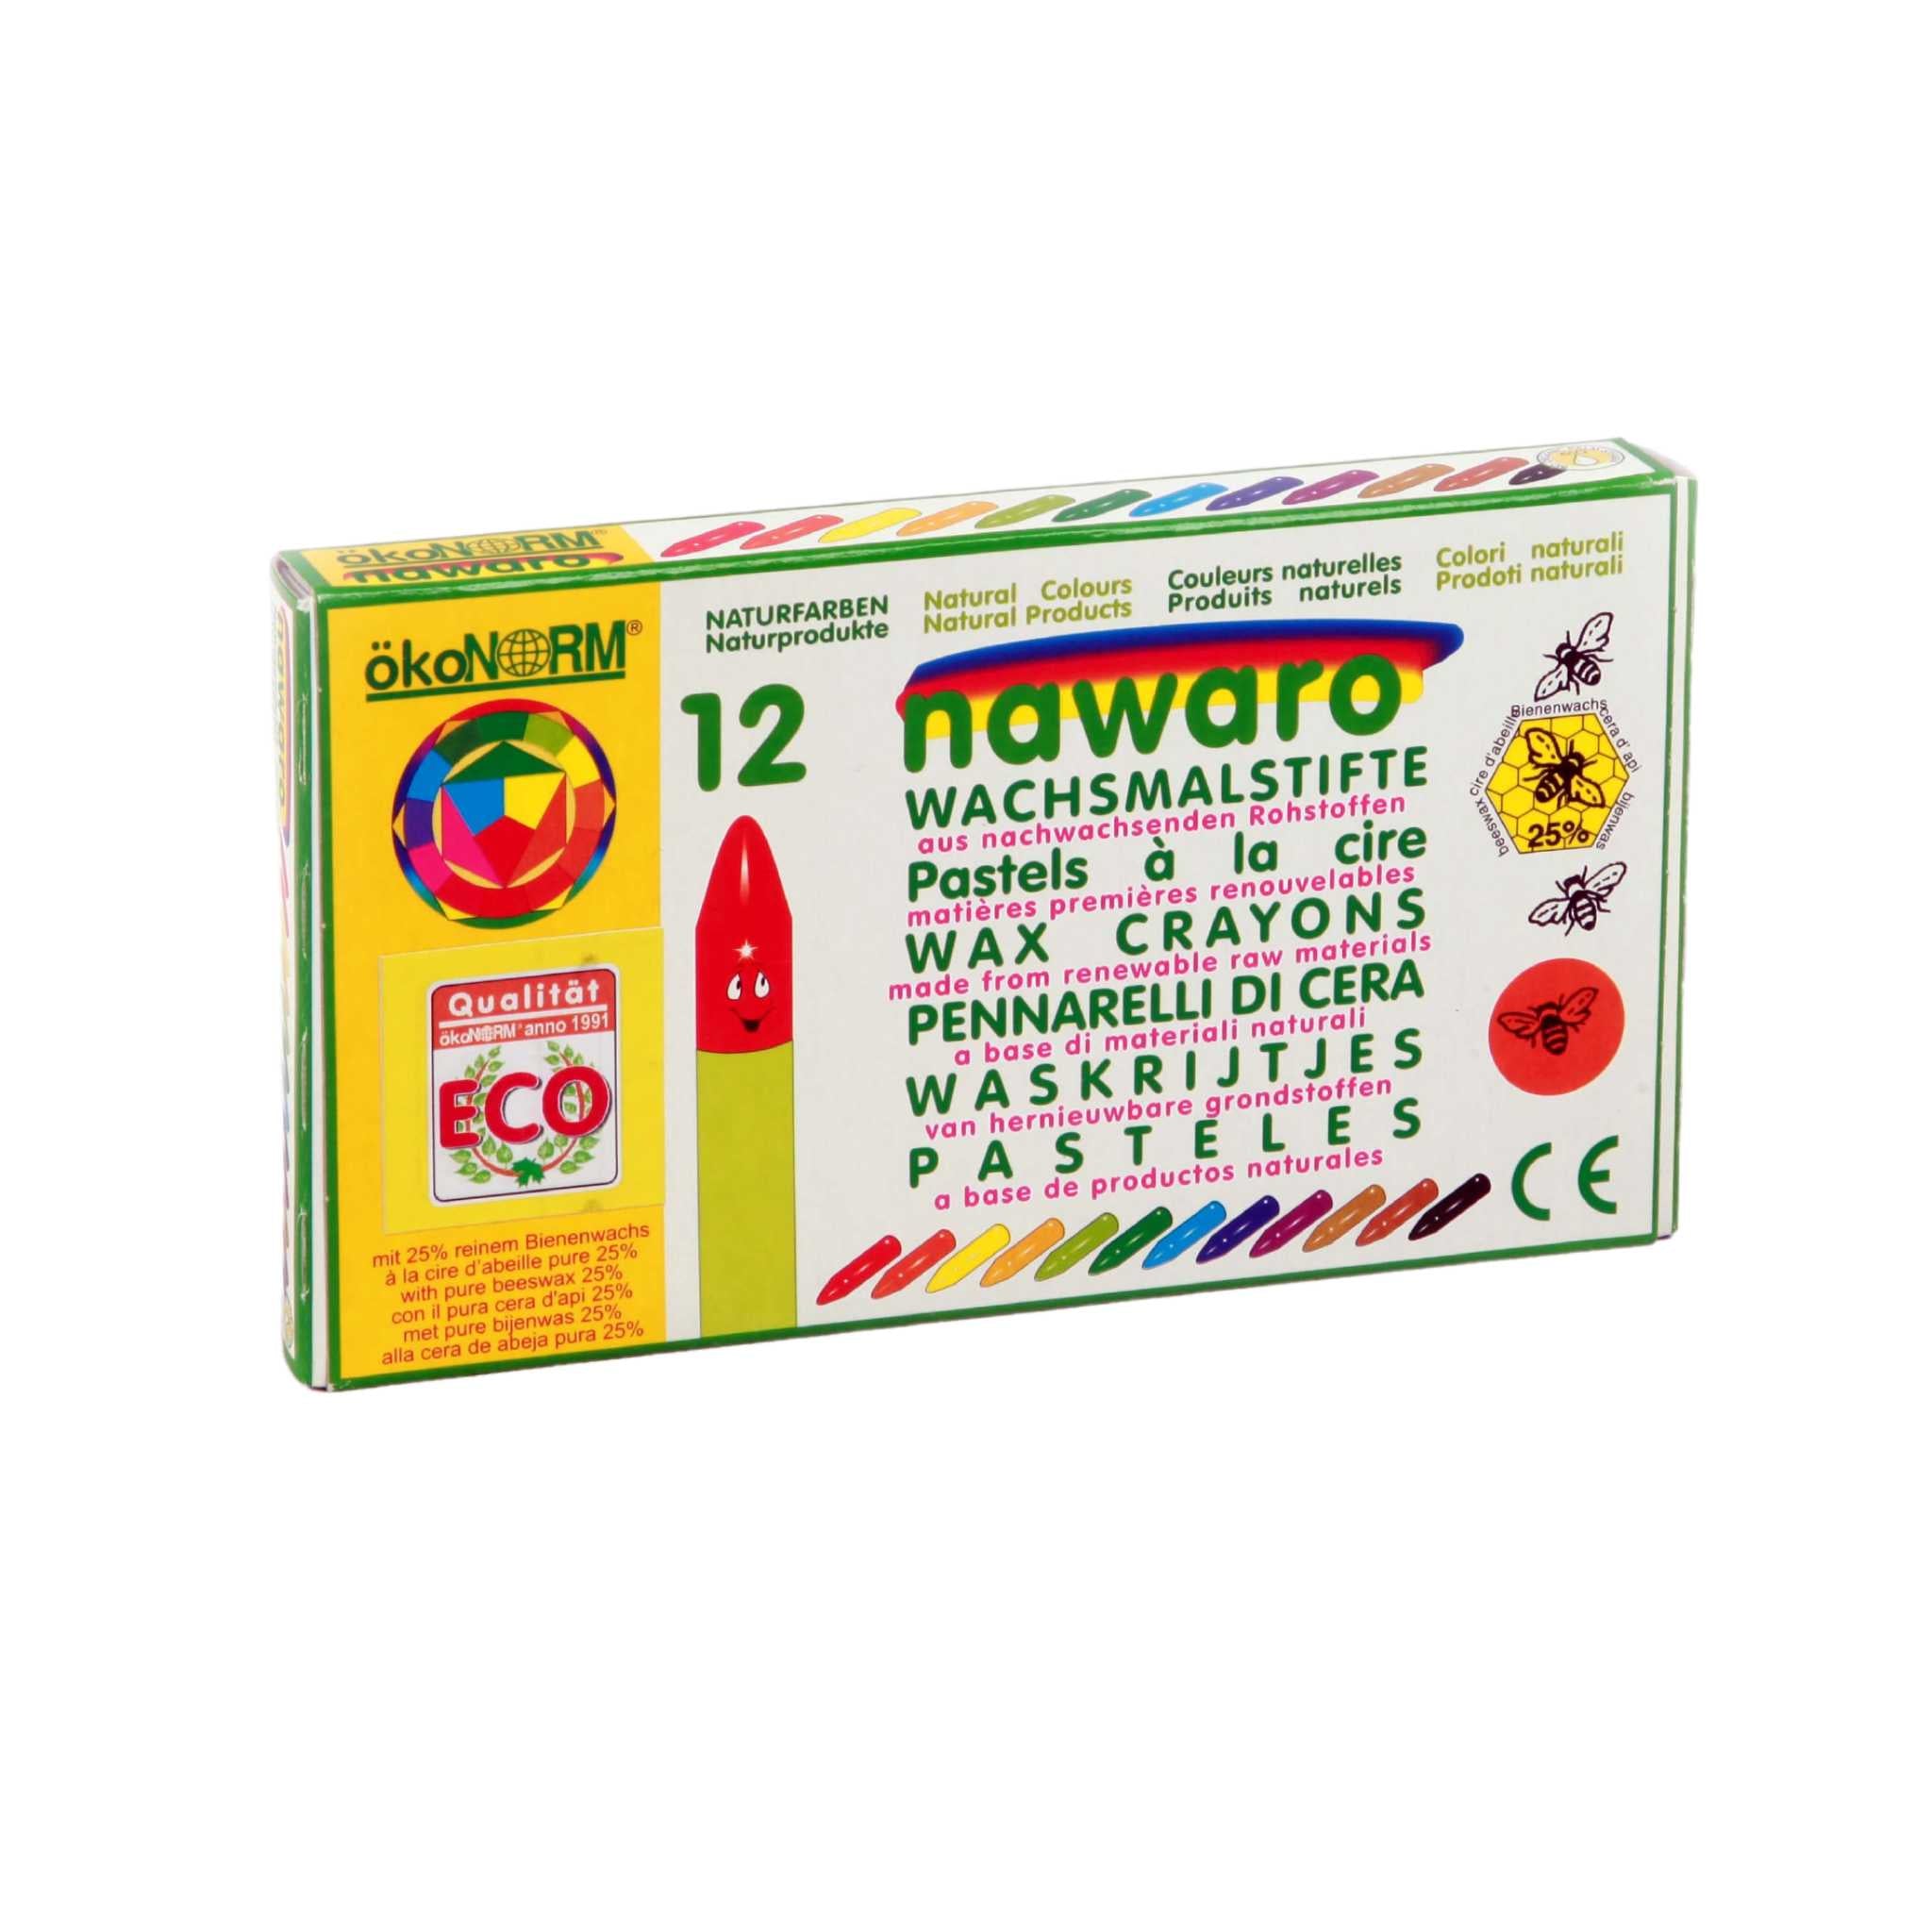 OkoNORM Wax Crayons - 12 Pieces - Showing Packagaing